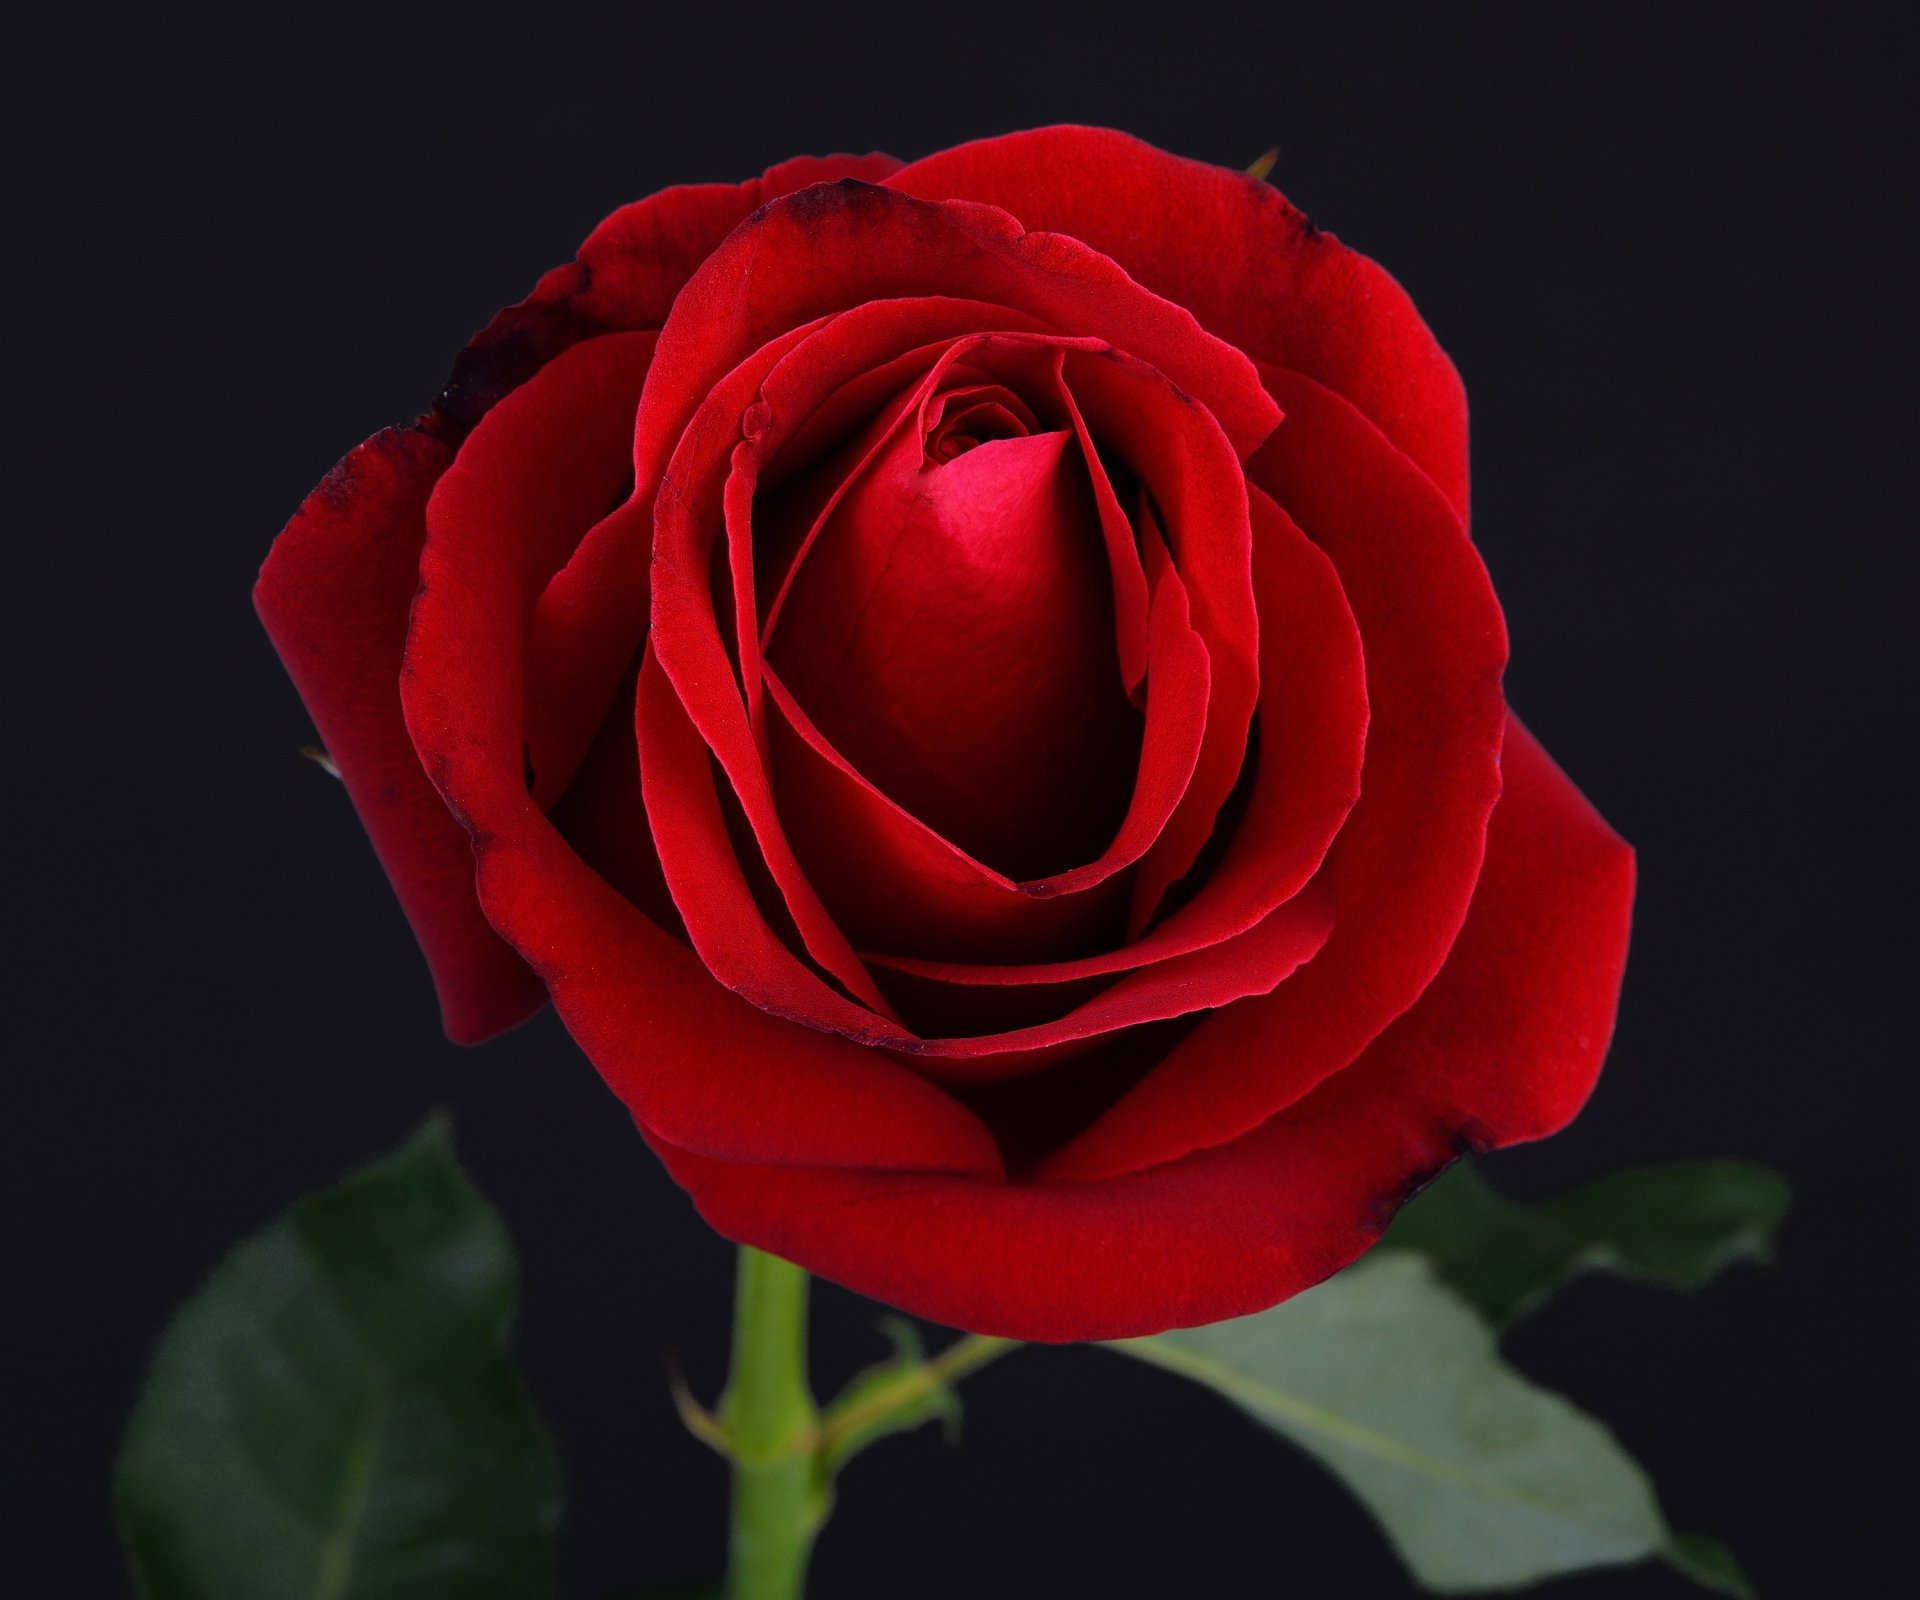 Rose HD Wallpaper | Background Image | 3000x2500 | ID ...